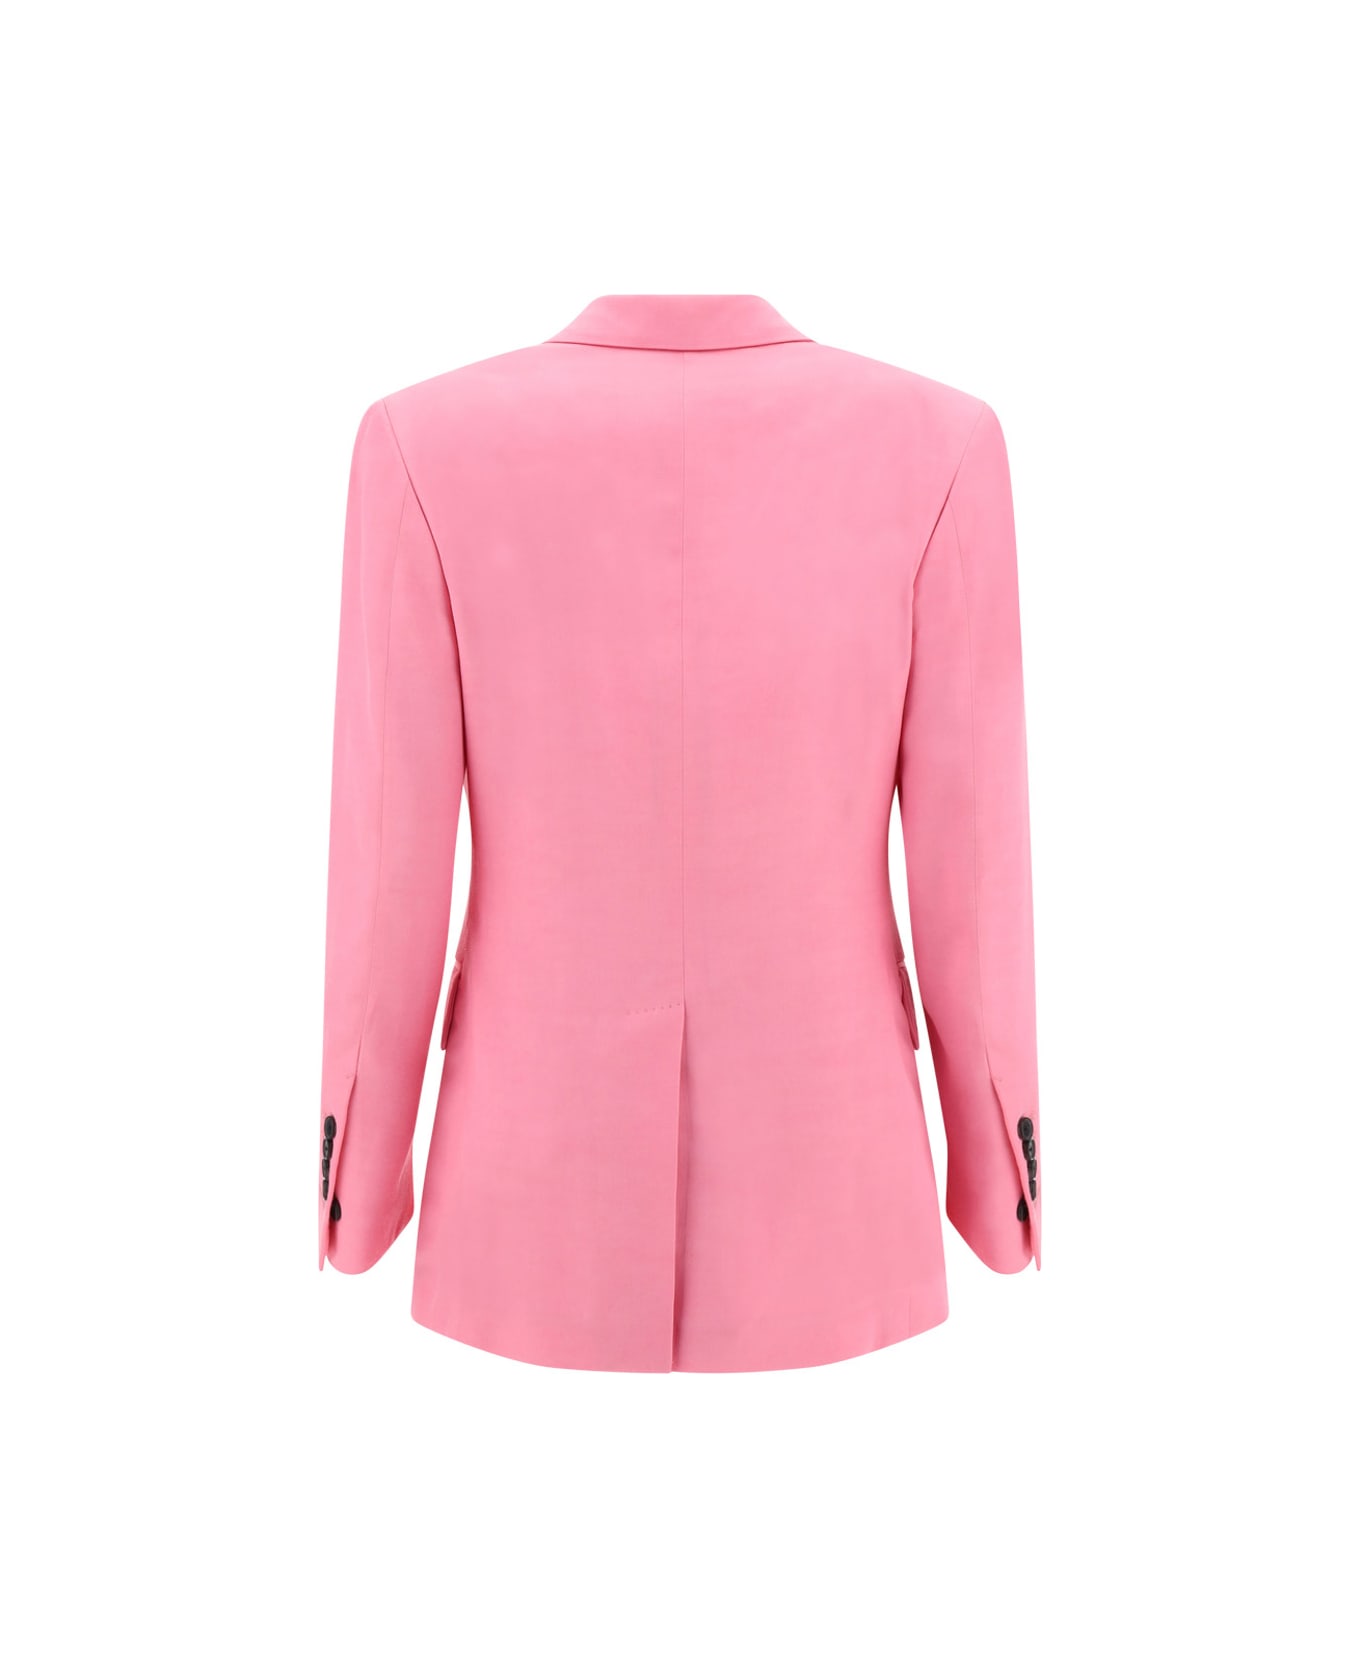 Tom Ford Double-breasted Blazer - Pink ブレザー